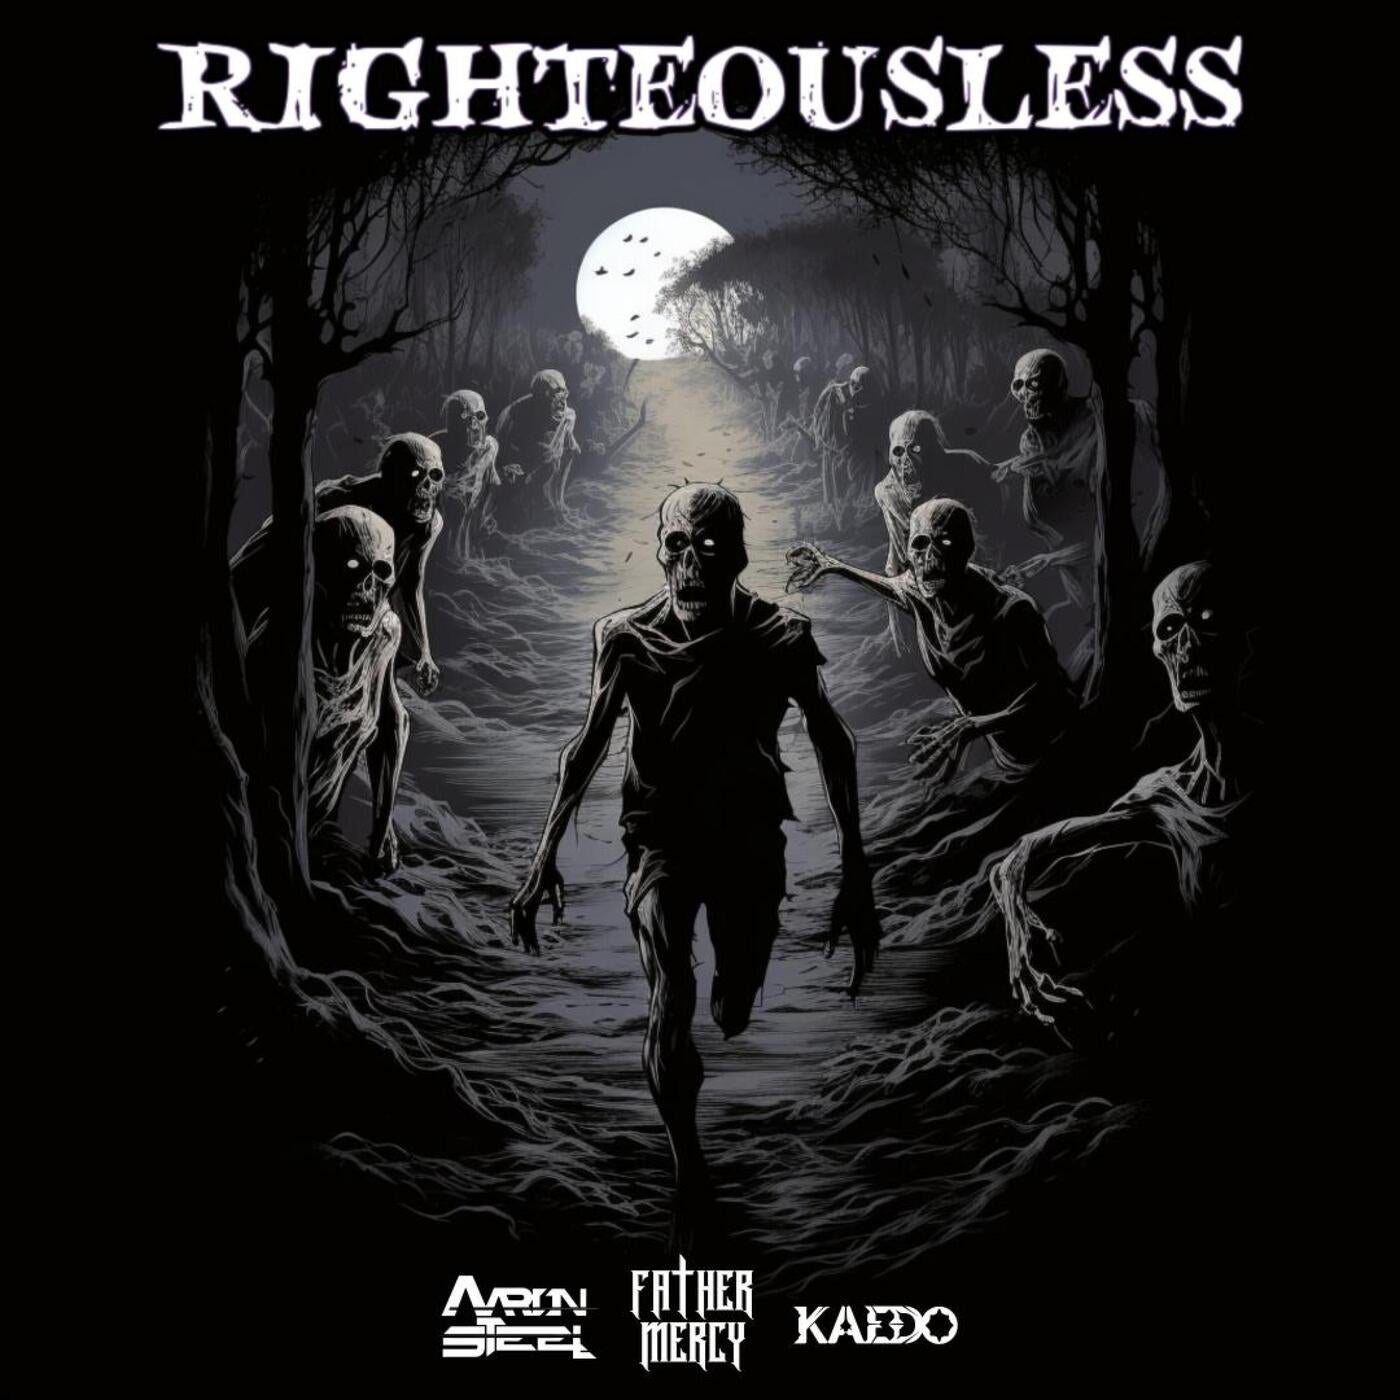 Righteousless